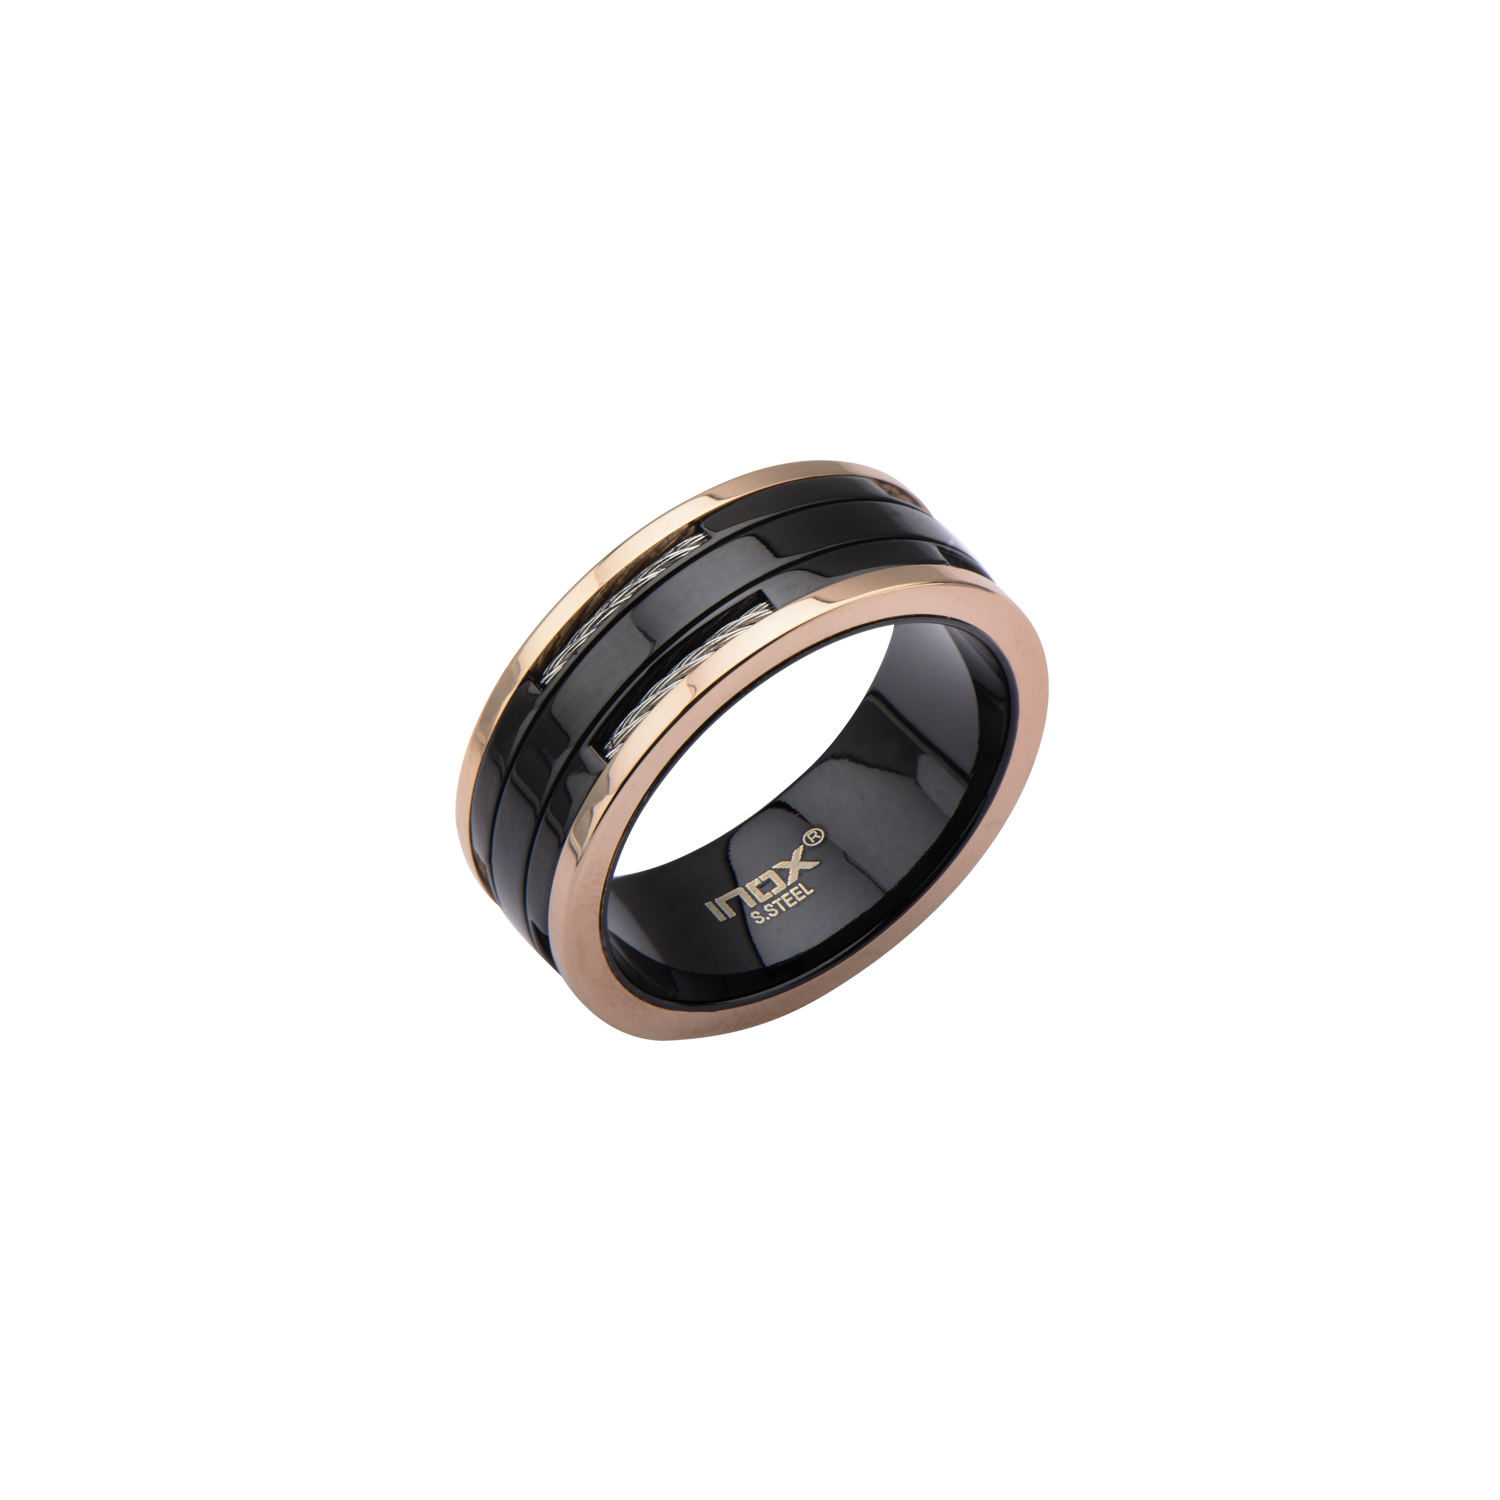 Black Plated and Rose Gold Plated Ring with Inlayed Cable Ken Walker Jewelers Gig Harbor, WA